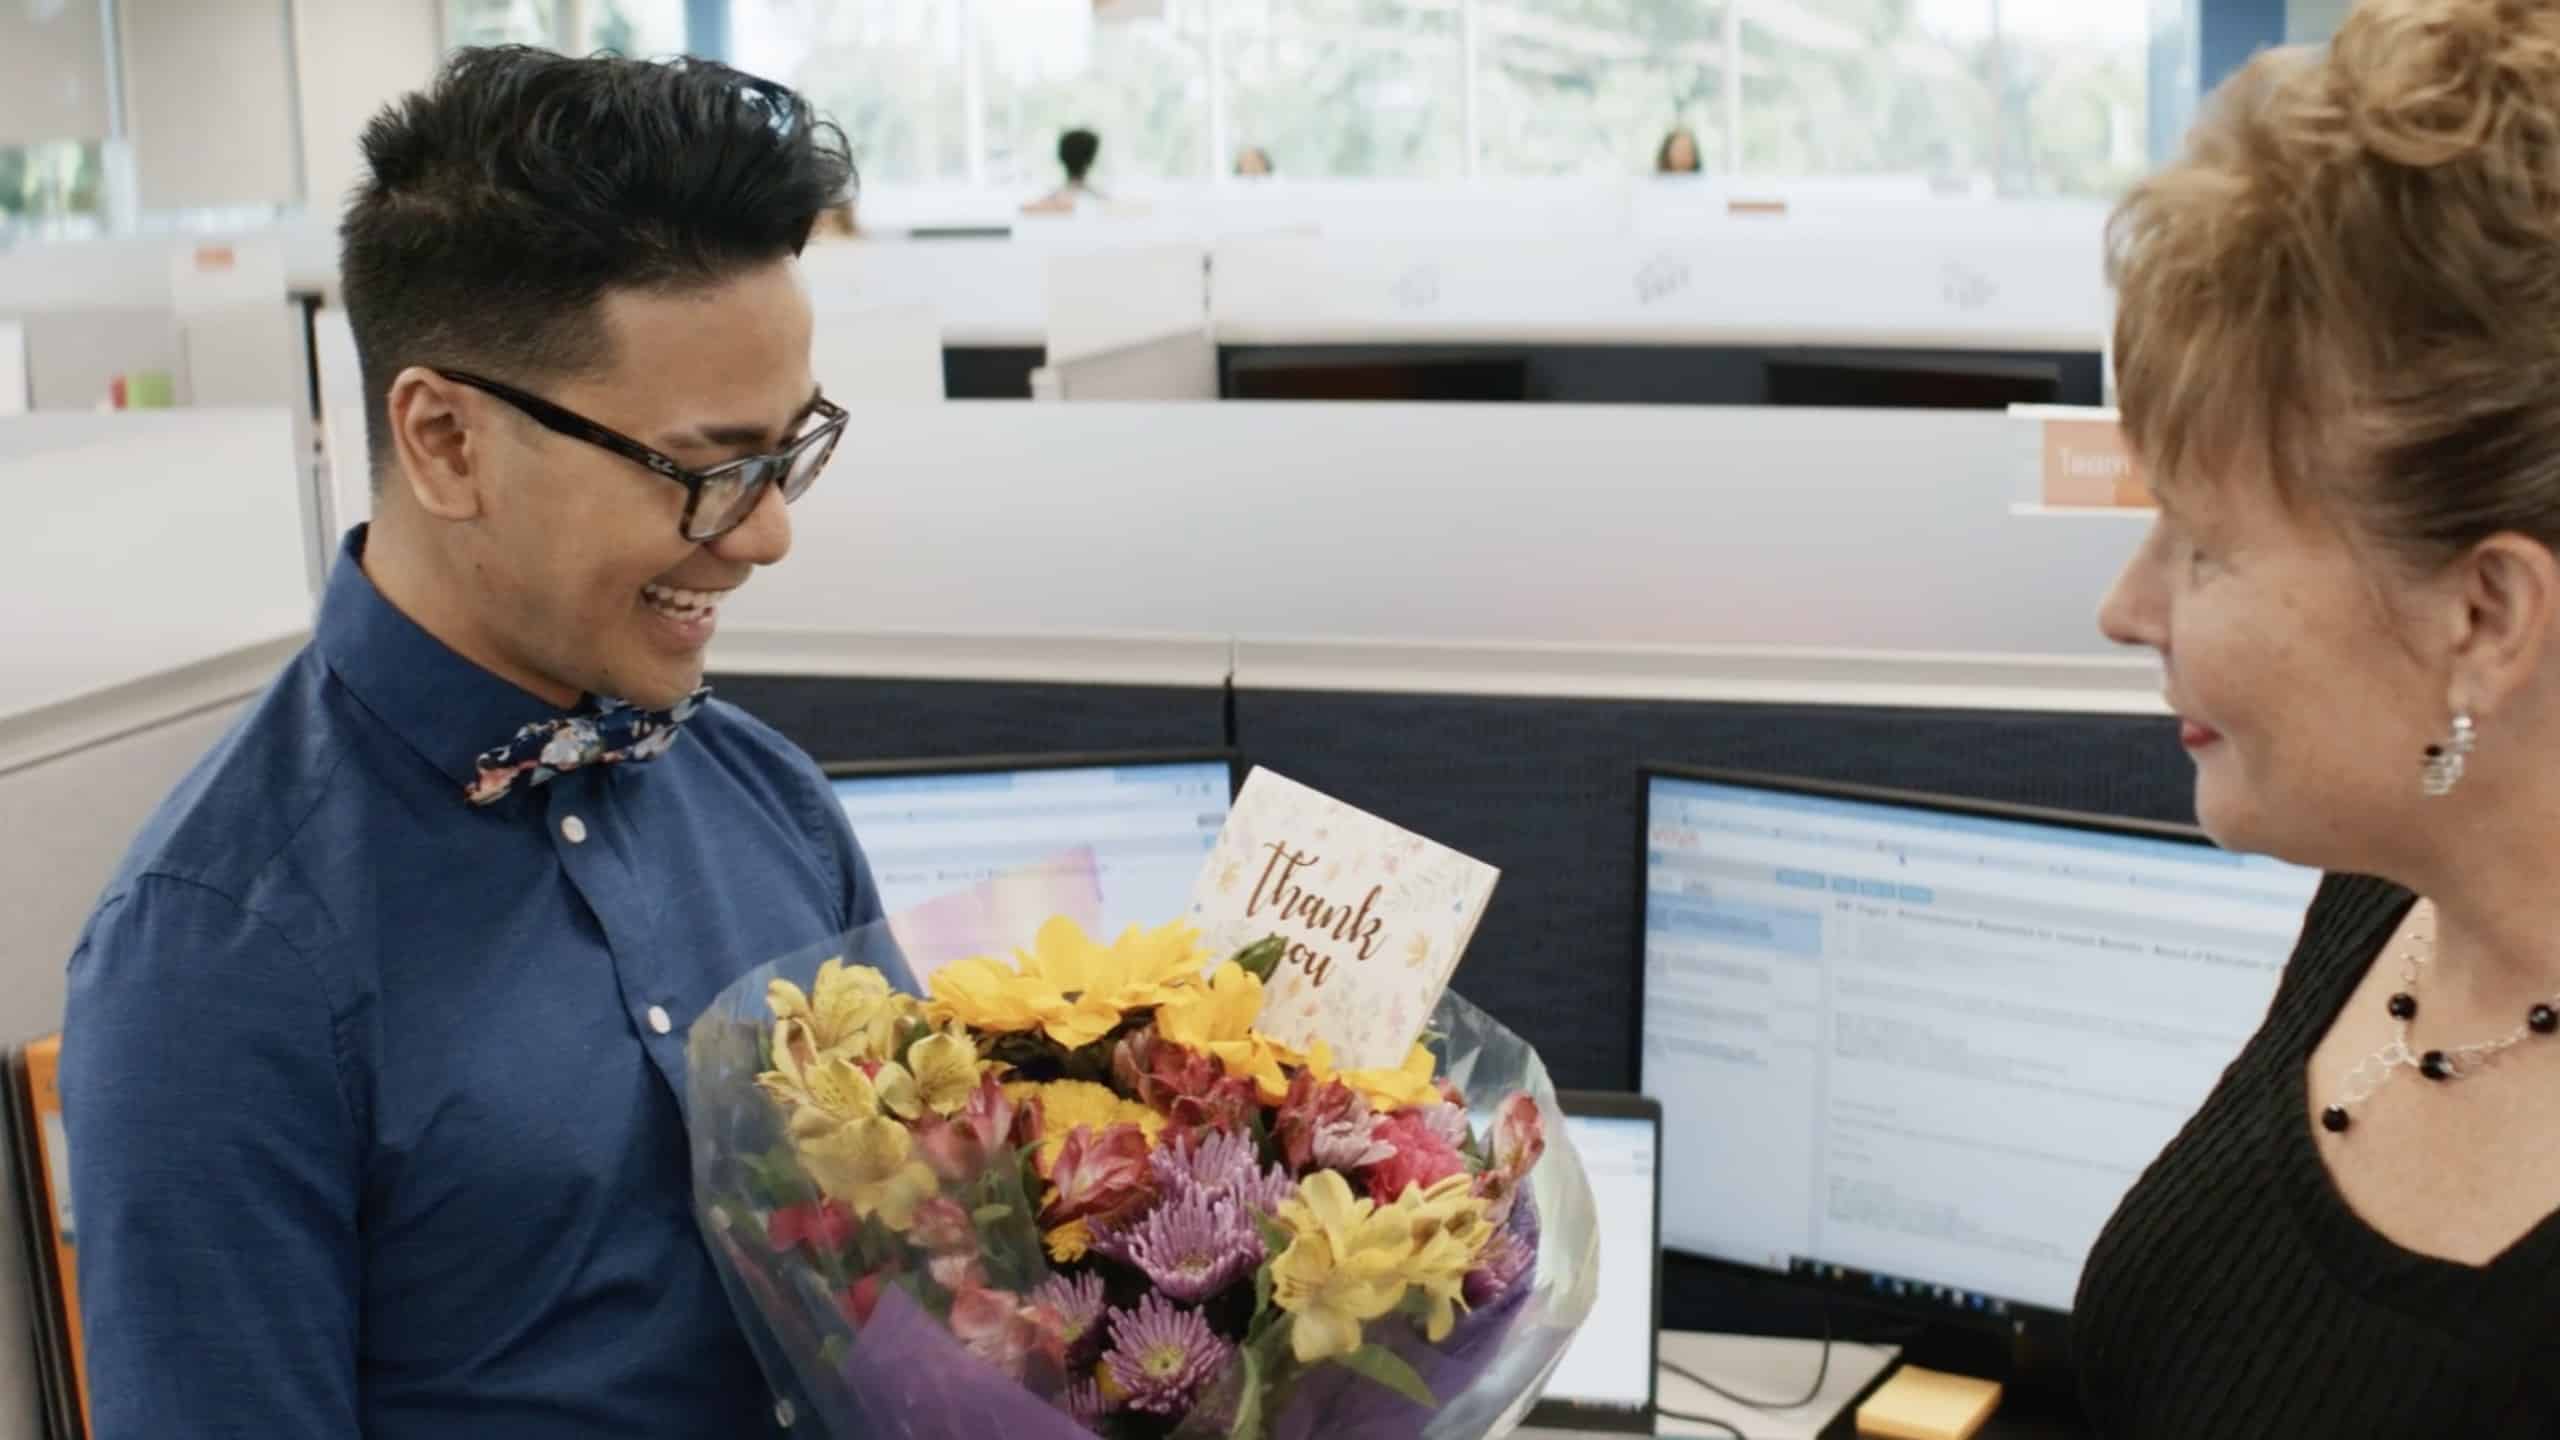 Employee getting a delivery of flowers with a thank you note